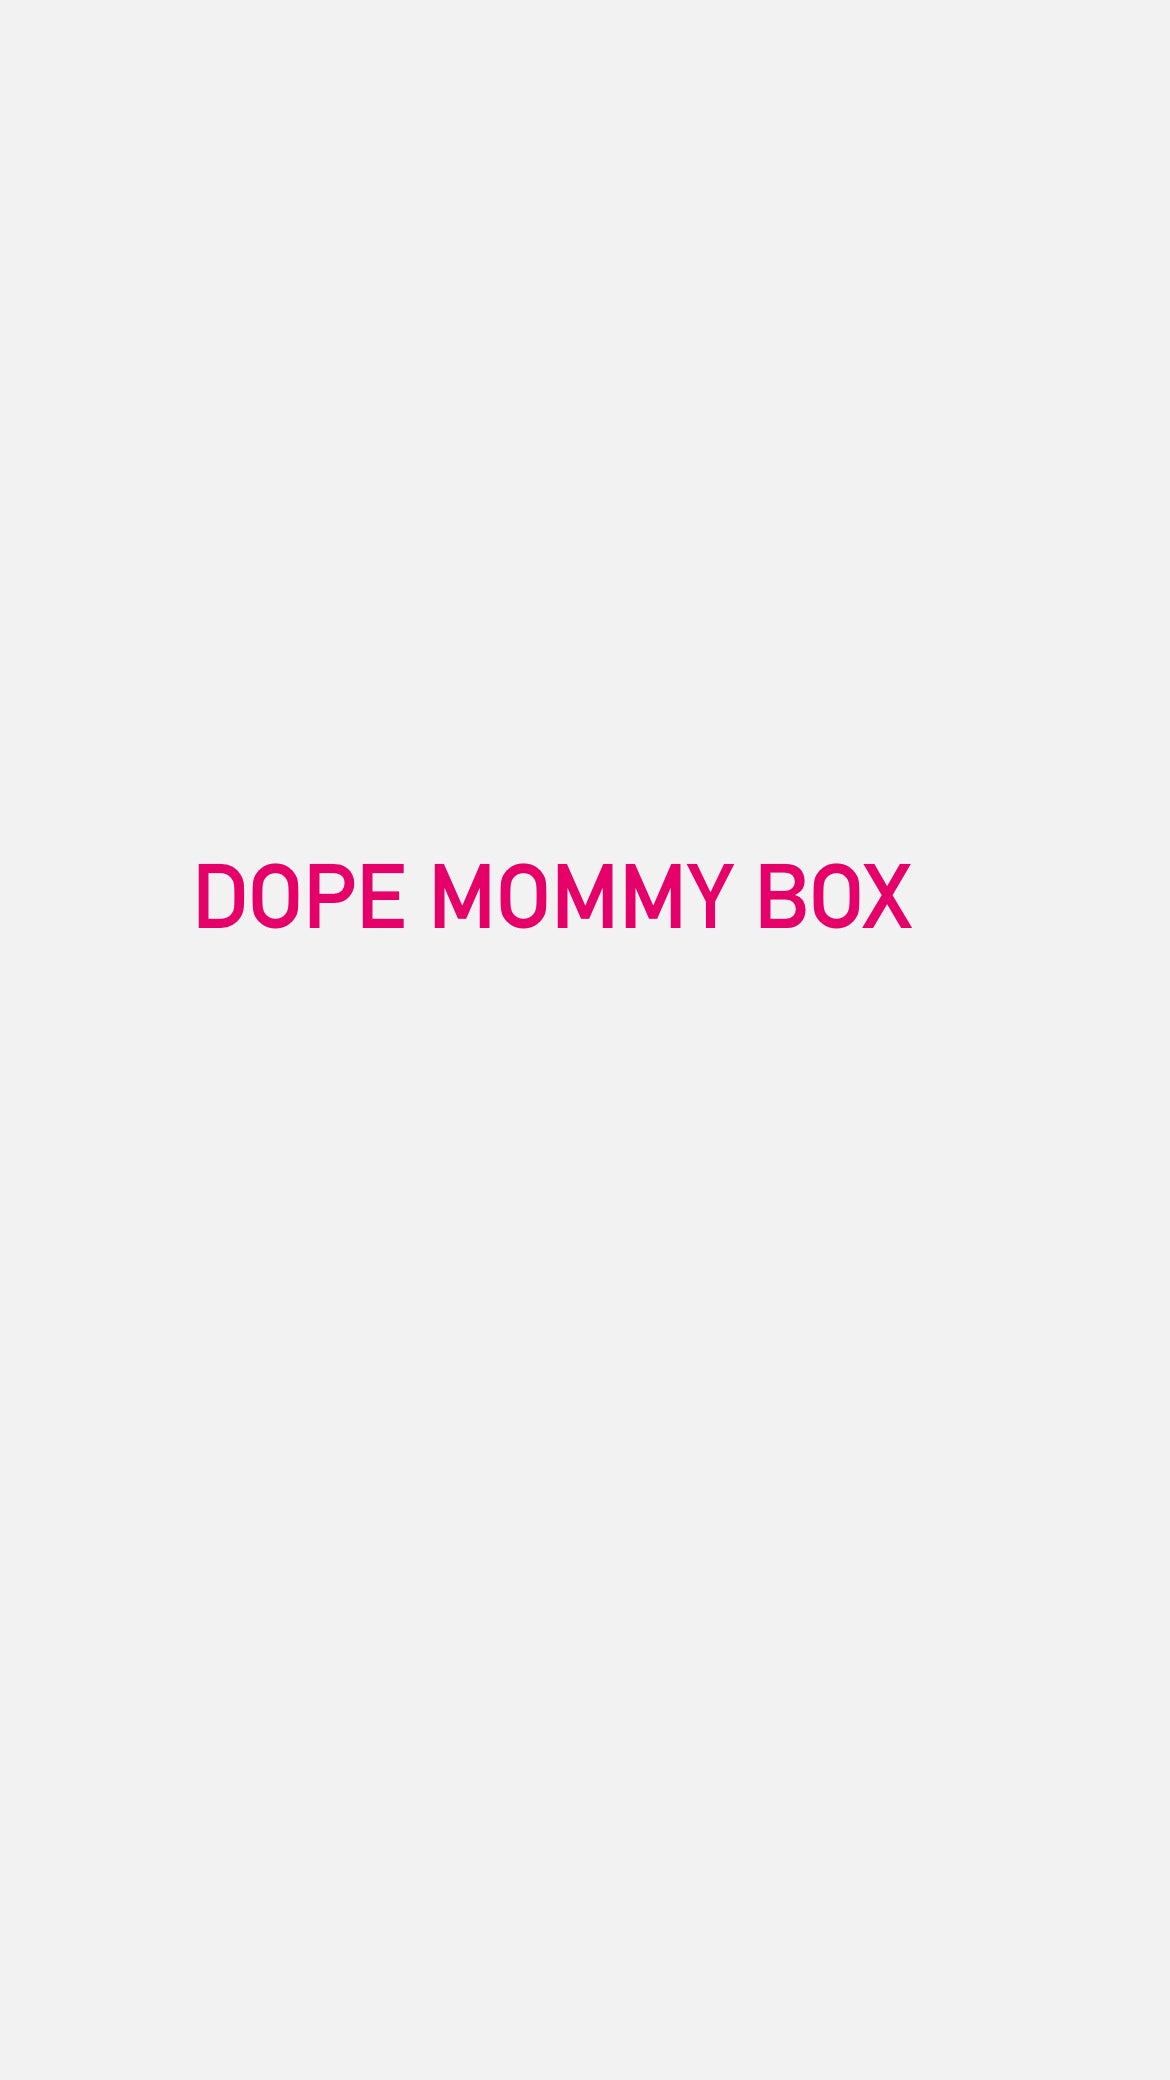 Dope Mommy subscription box